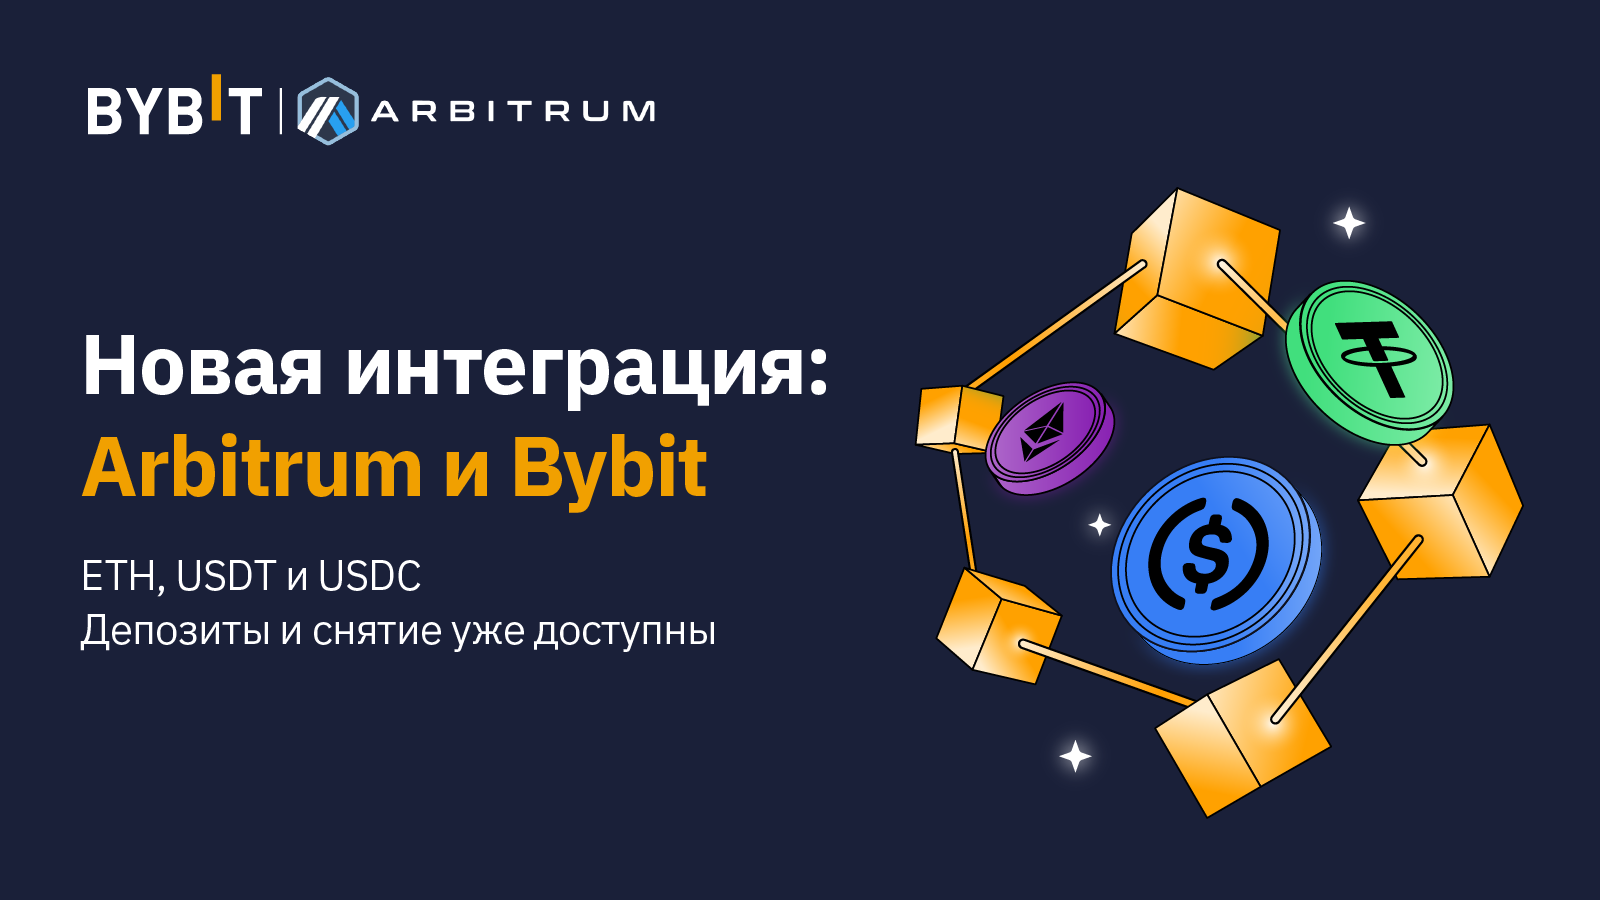 Bybit support